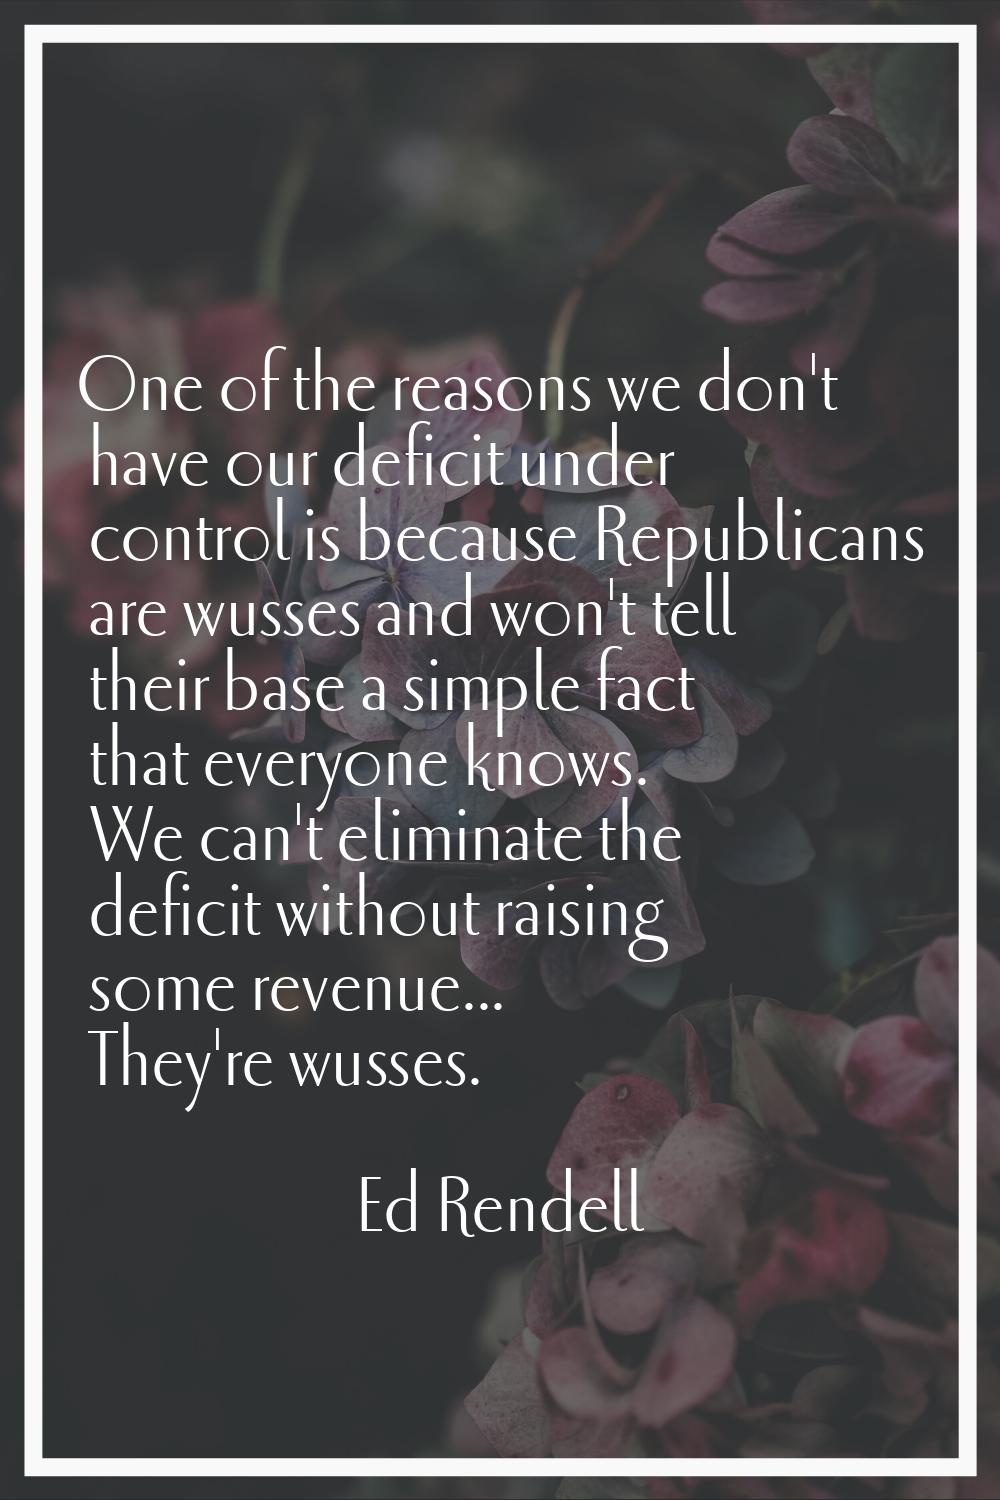 One of the reasons we don't have our deficit under control is because Republicans are wusses and wo